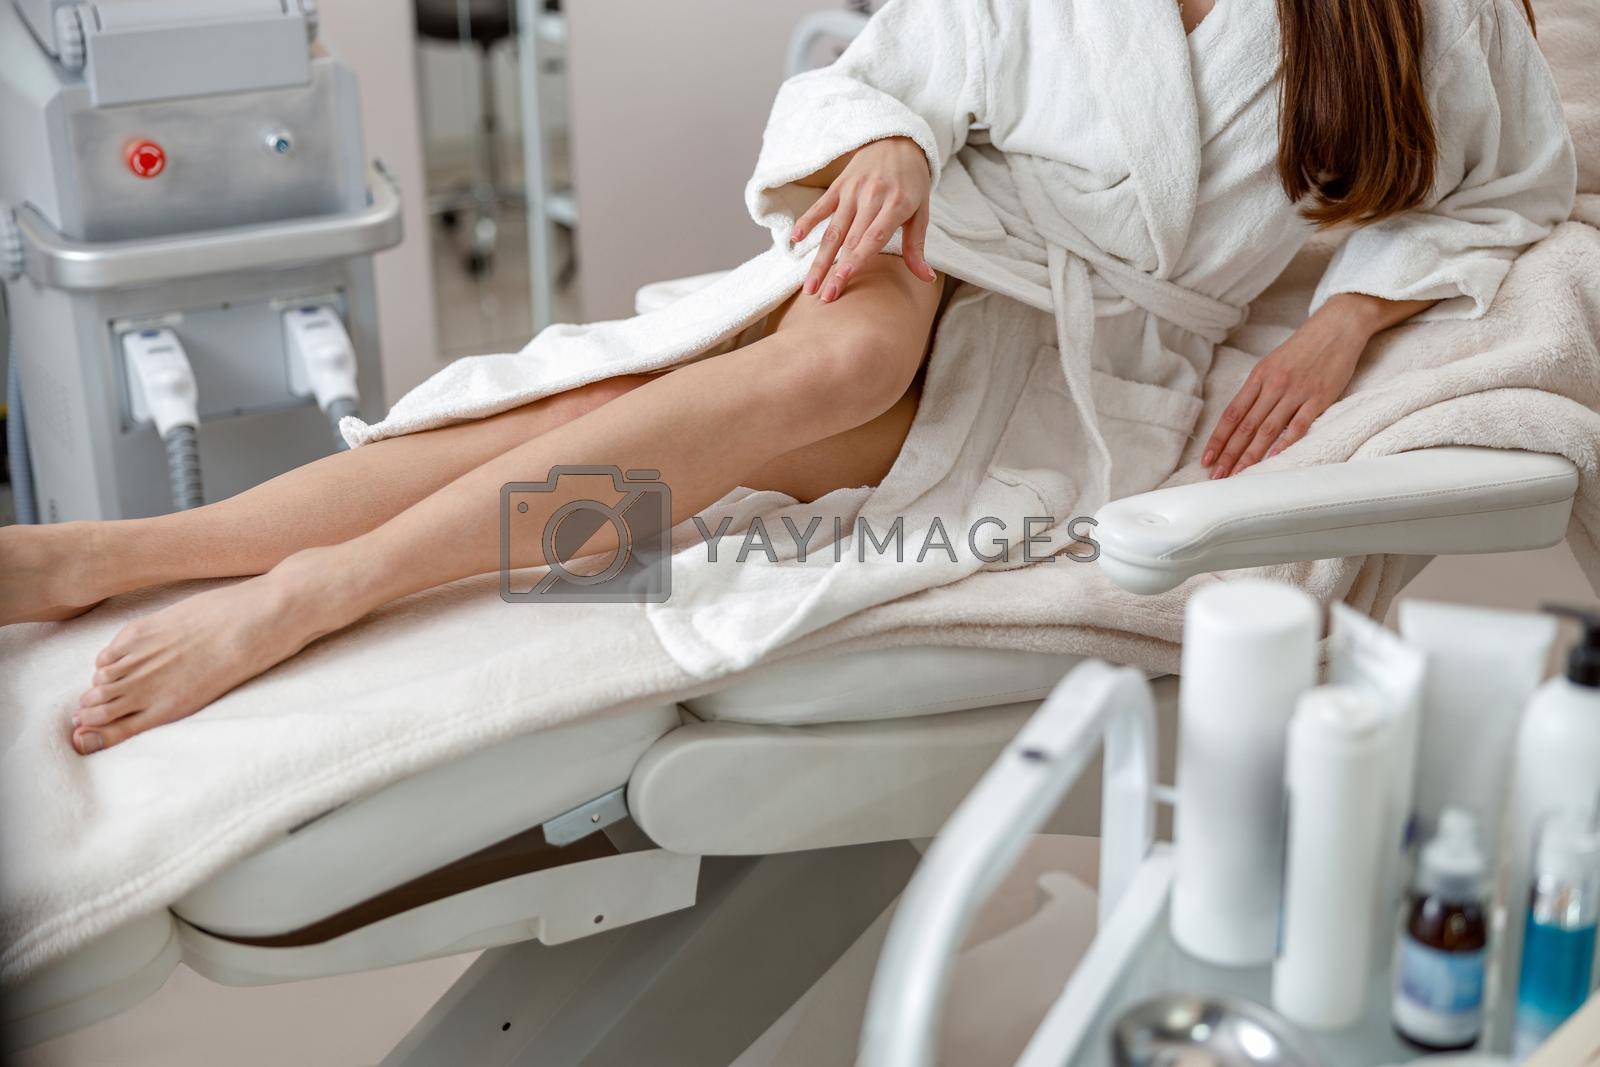 Perfect smooth legs of woman in spa center after beauty procedures. Laser epilation concept